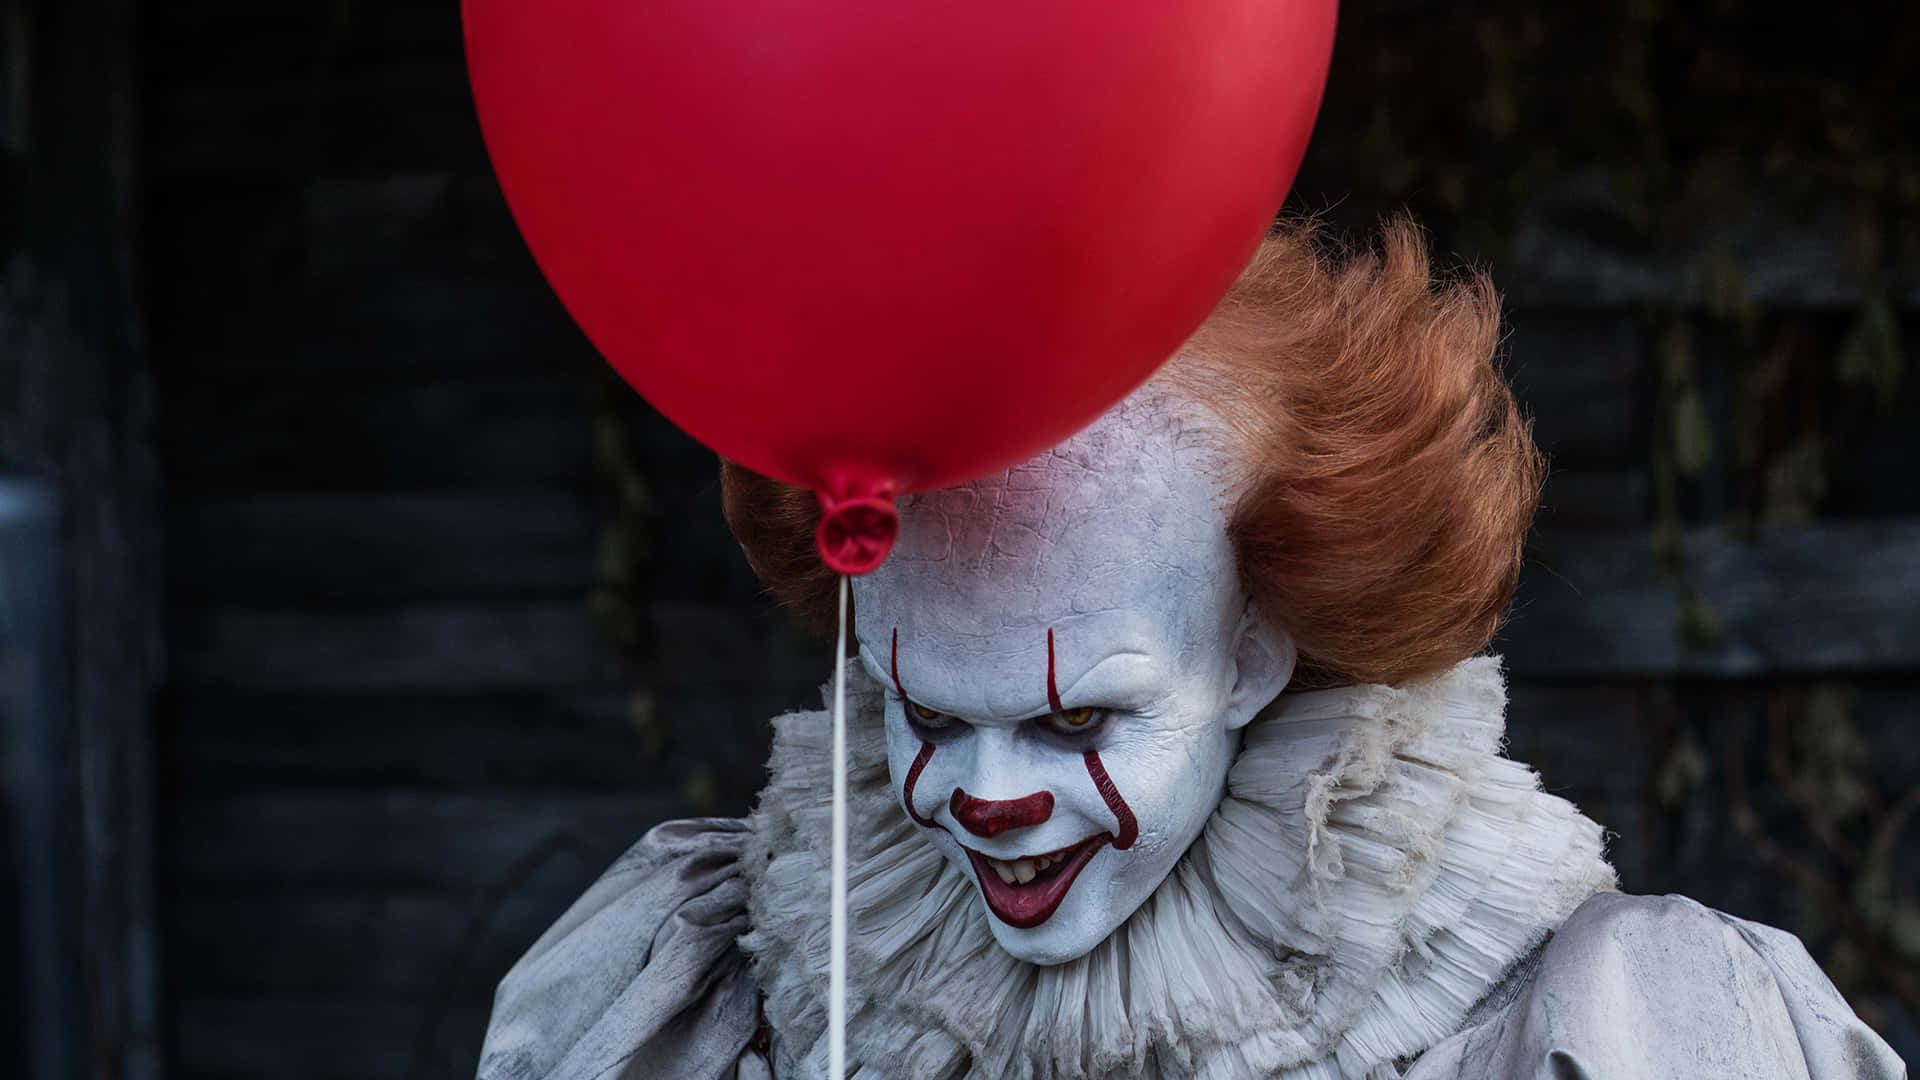 Creepy Clown Pennywise With Red Balloon Picture